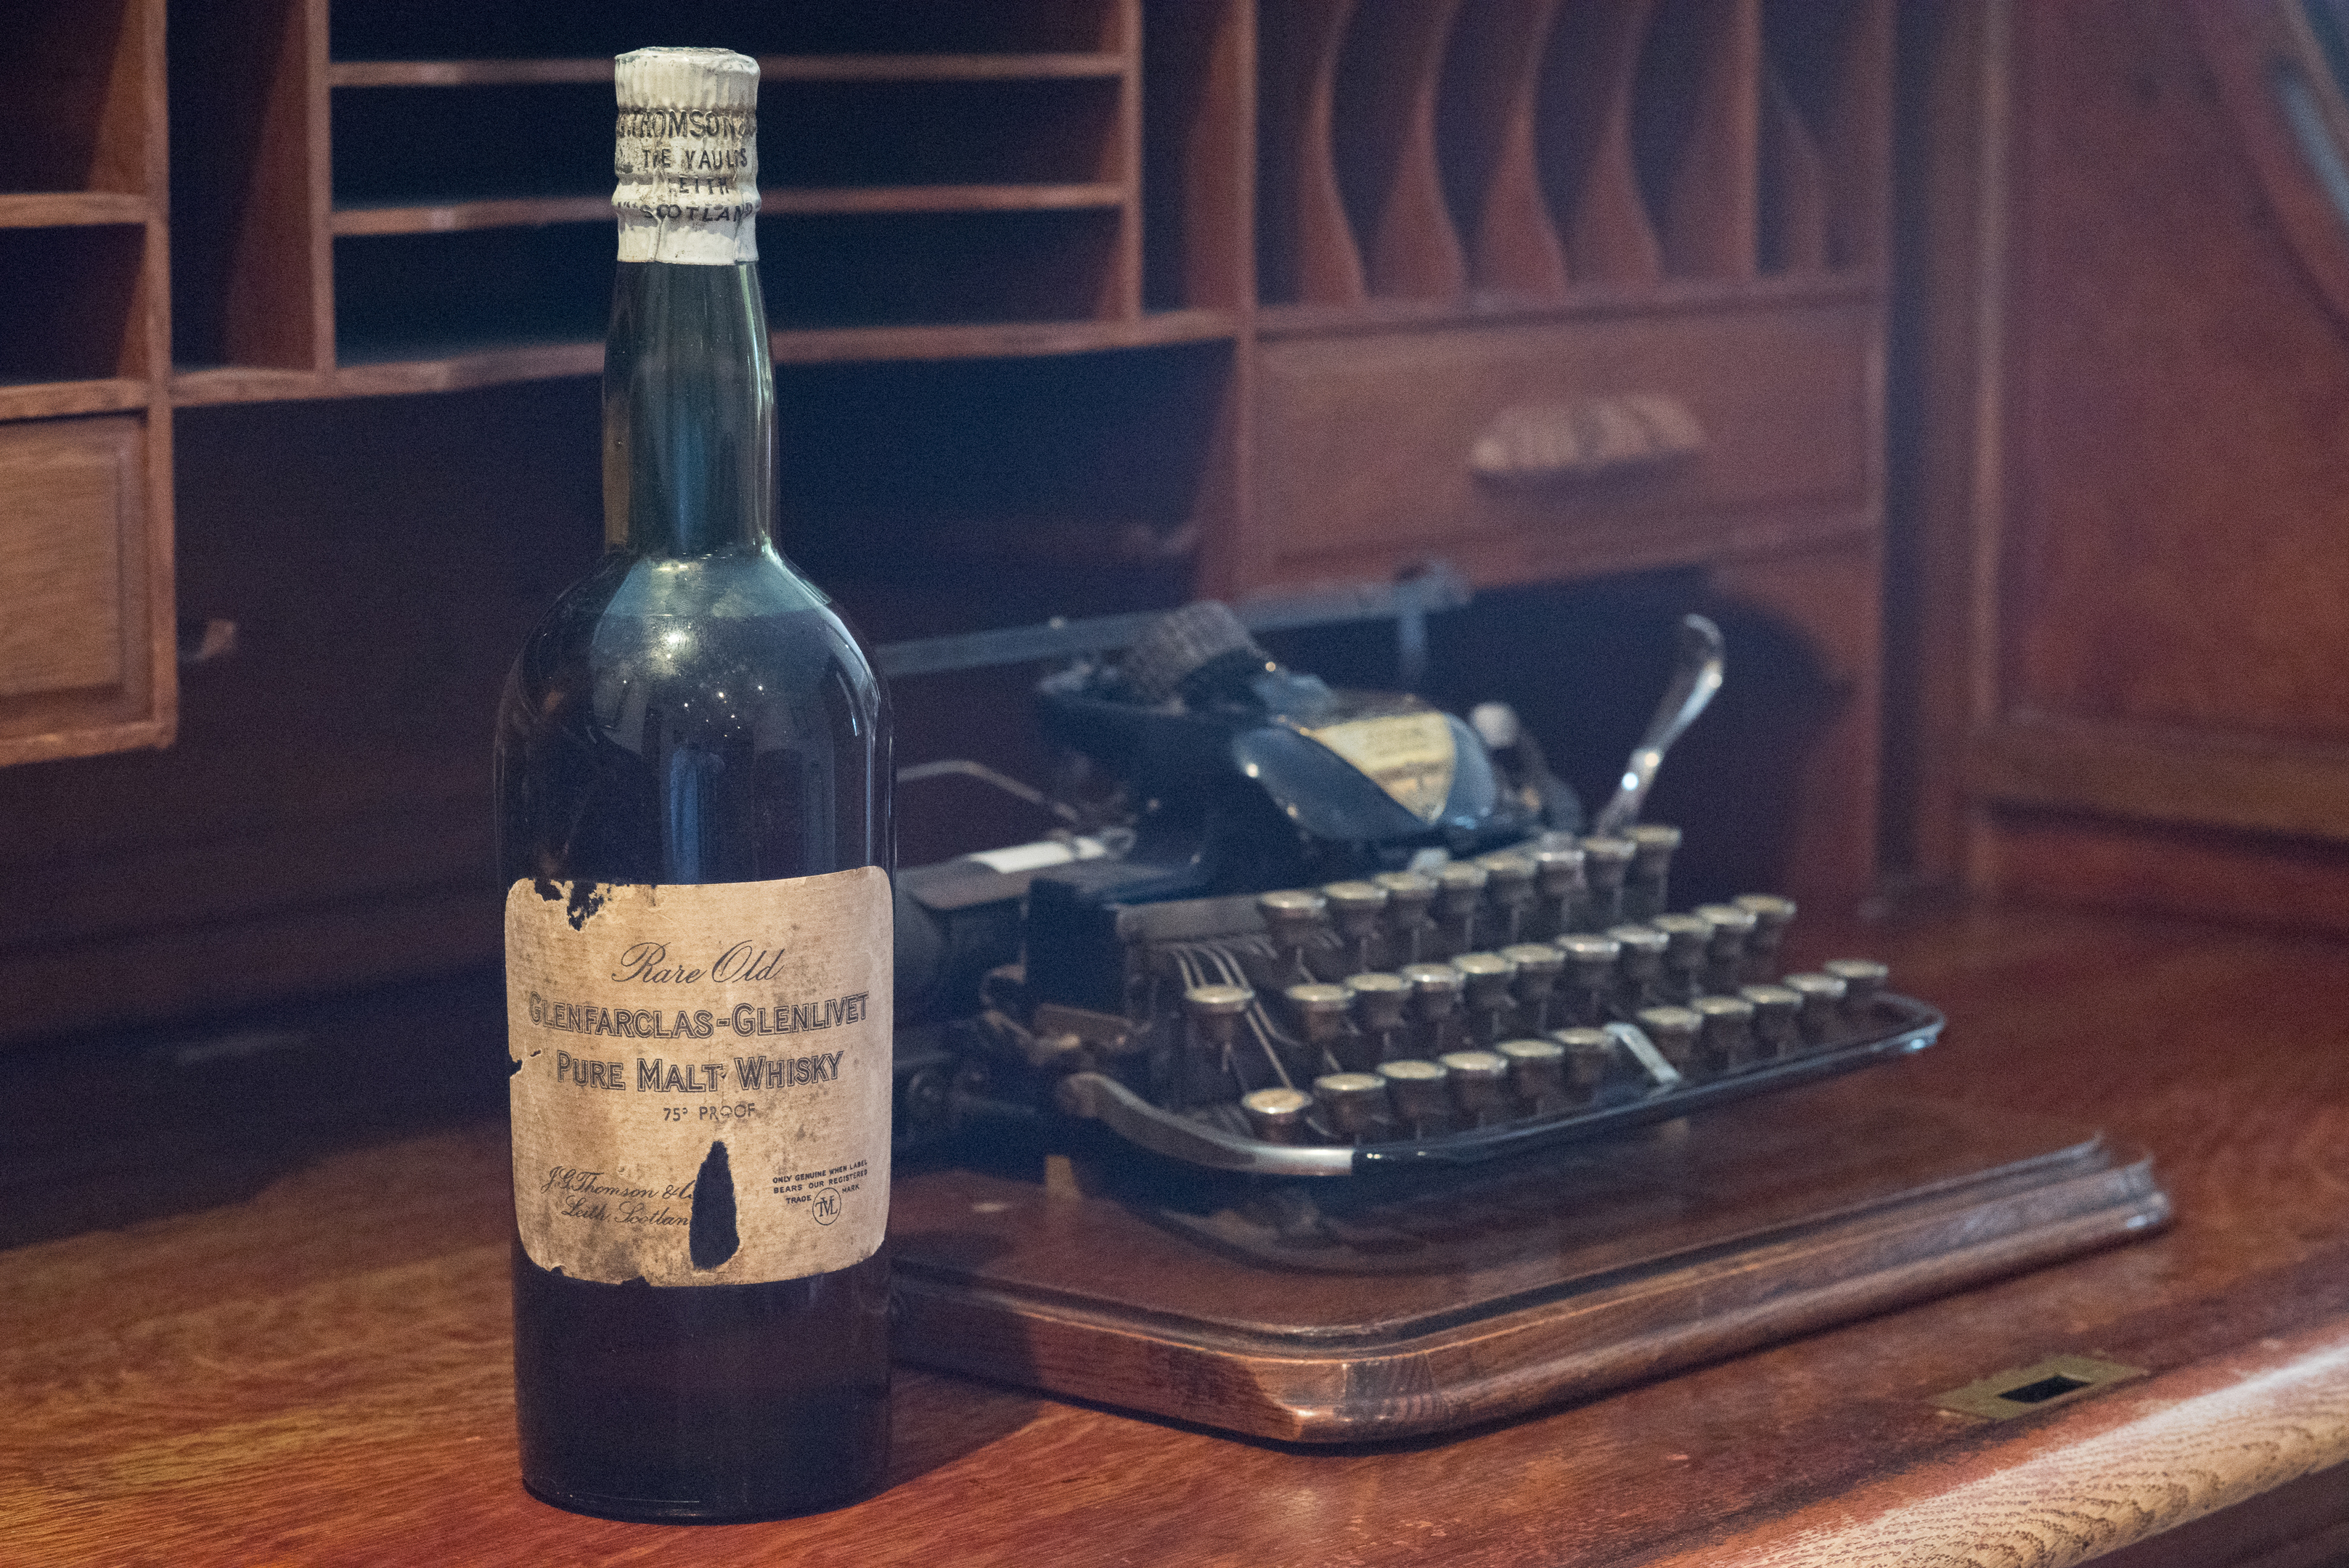 The rare bottle lay undiscovered for decades until it was found at the back of a laundry cupboard.